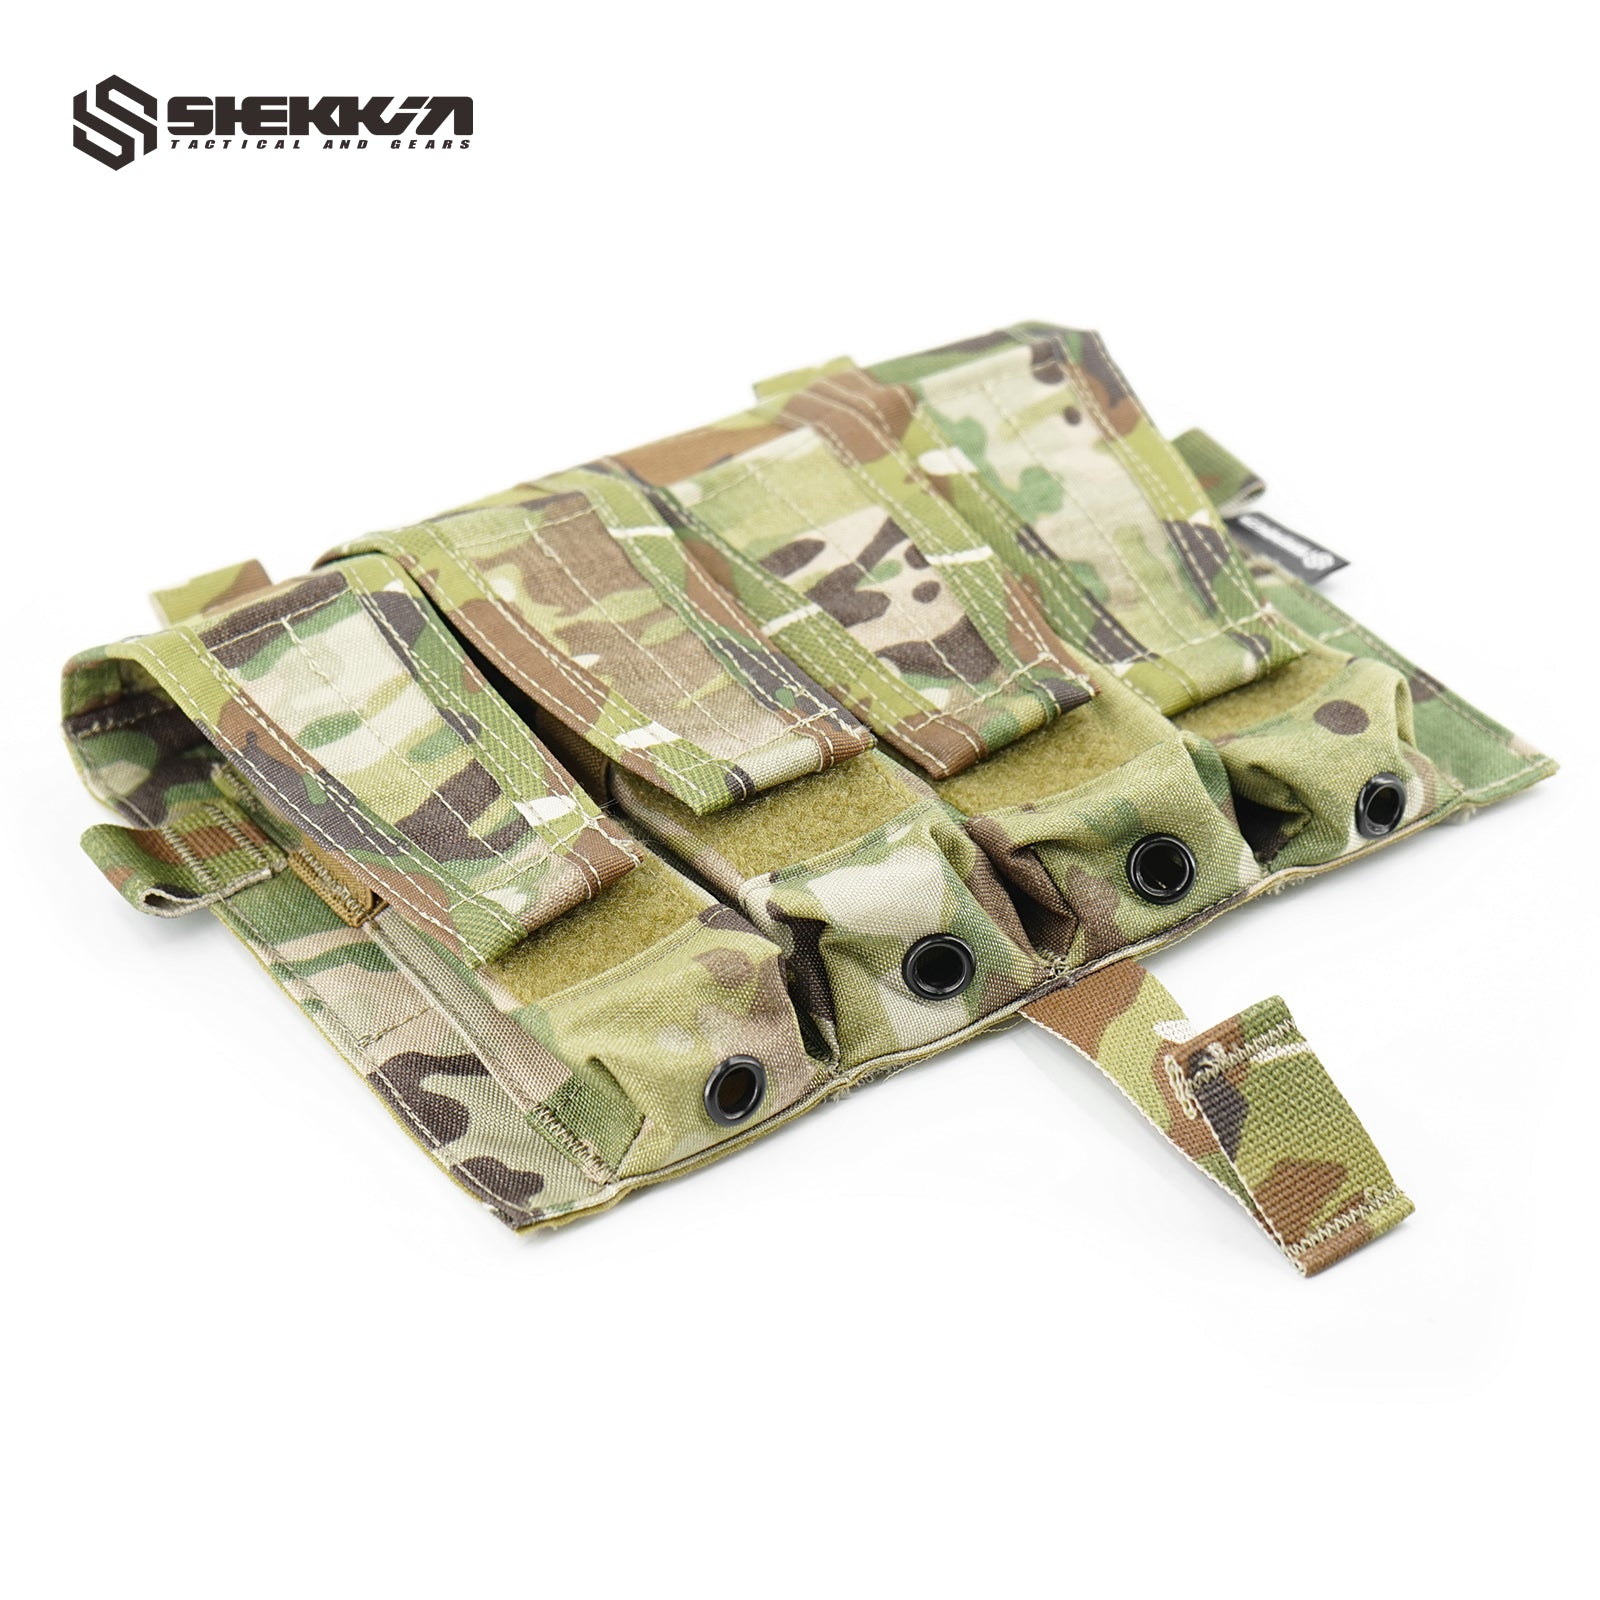 CP style Multicam Quad SMG mag pouch for AVS JPC2.0 - Shekkin Gears